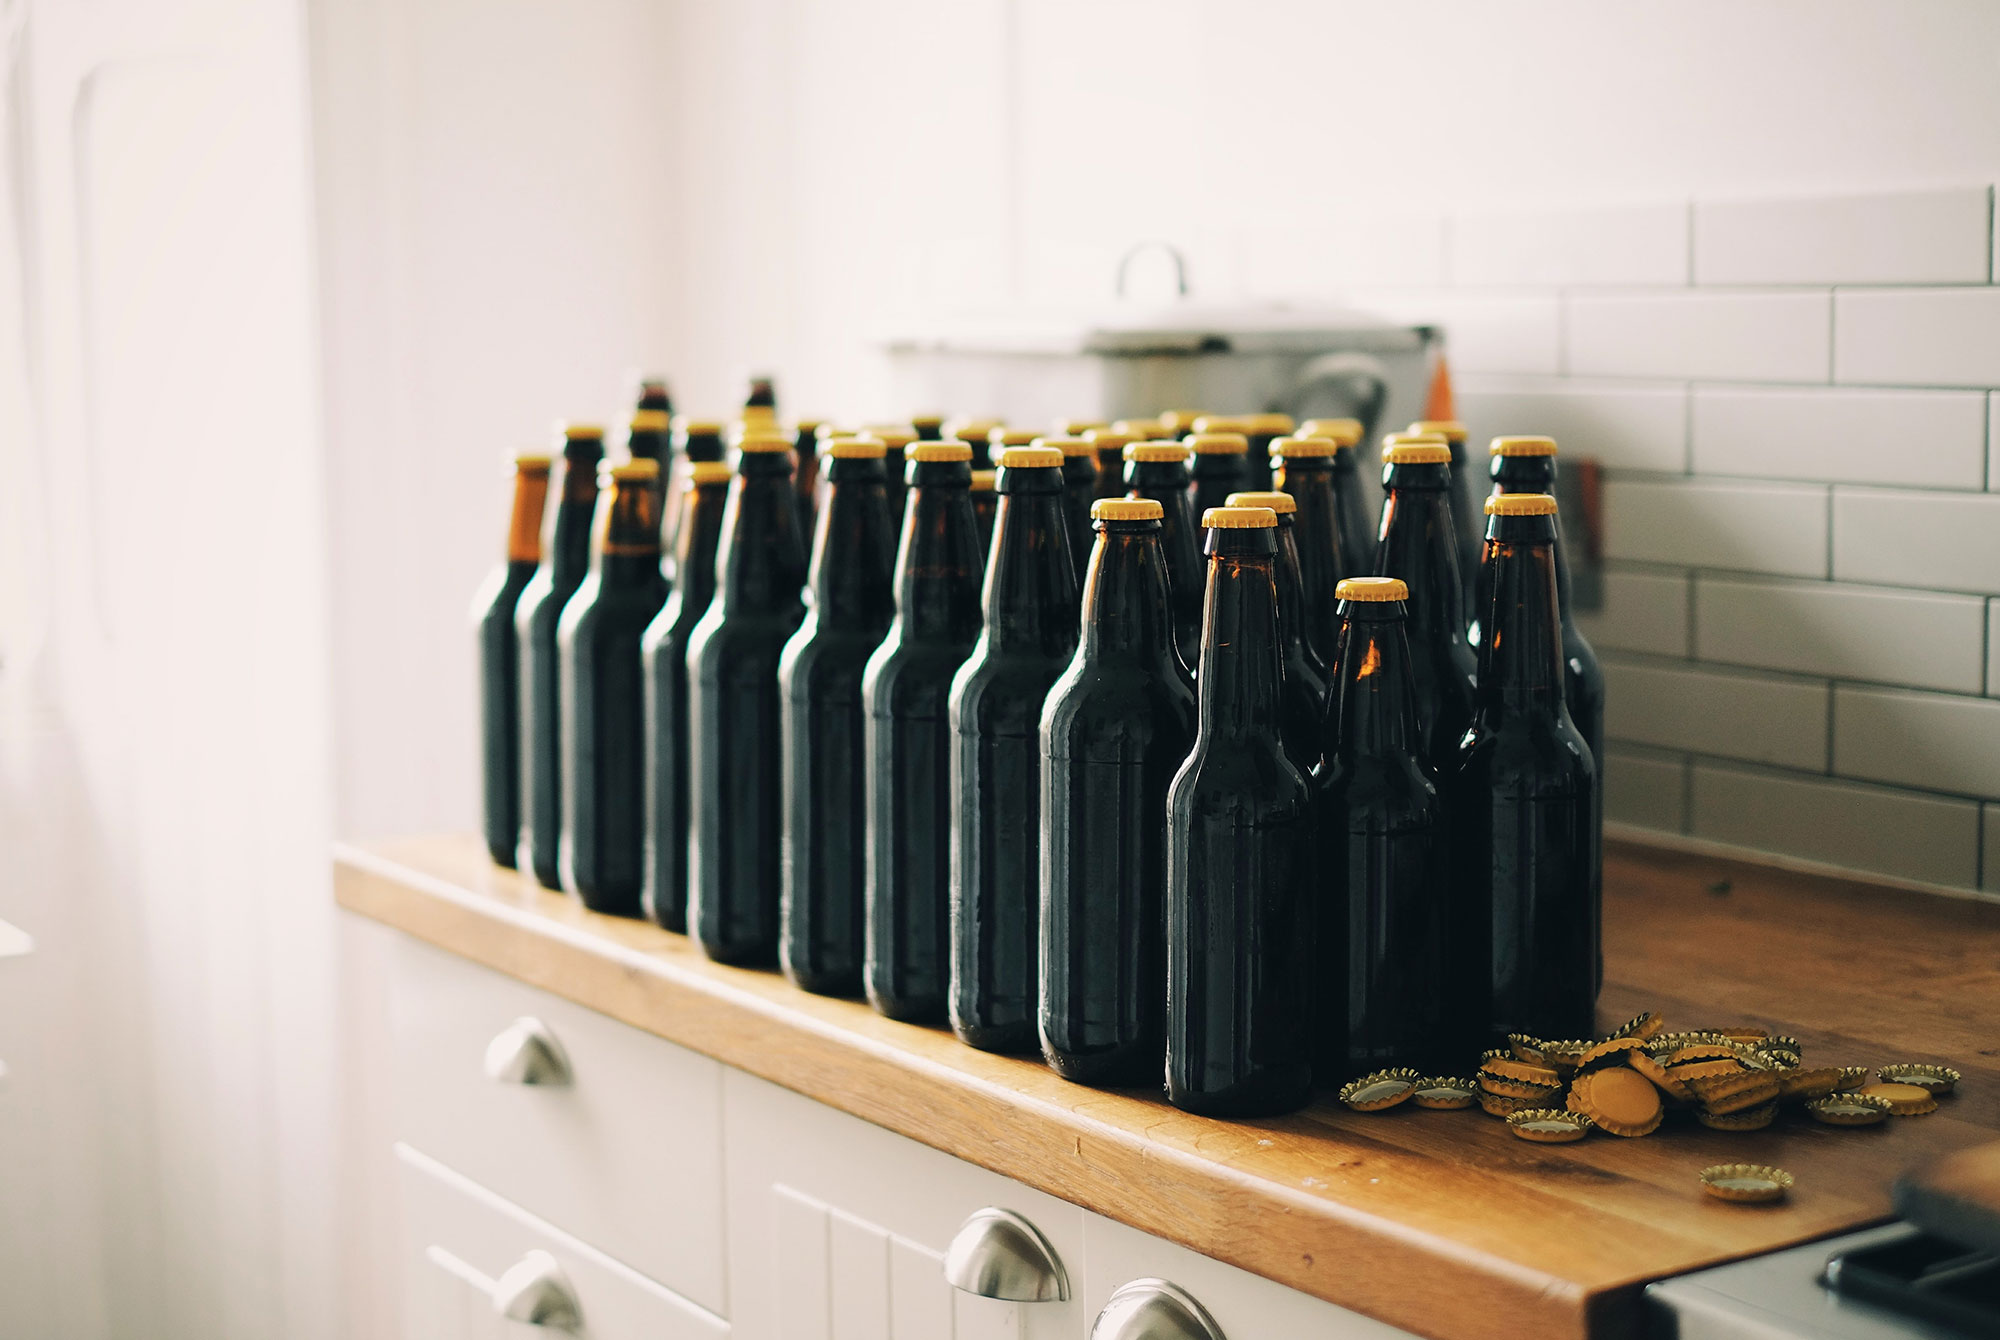 Homebrewing 101: A Crash Course in Getting Started